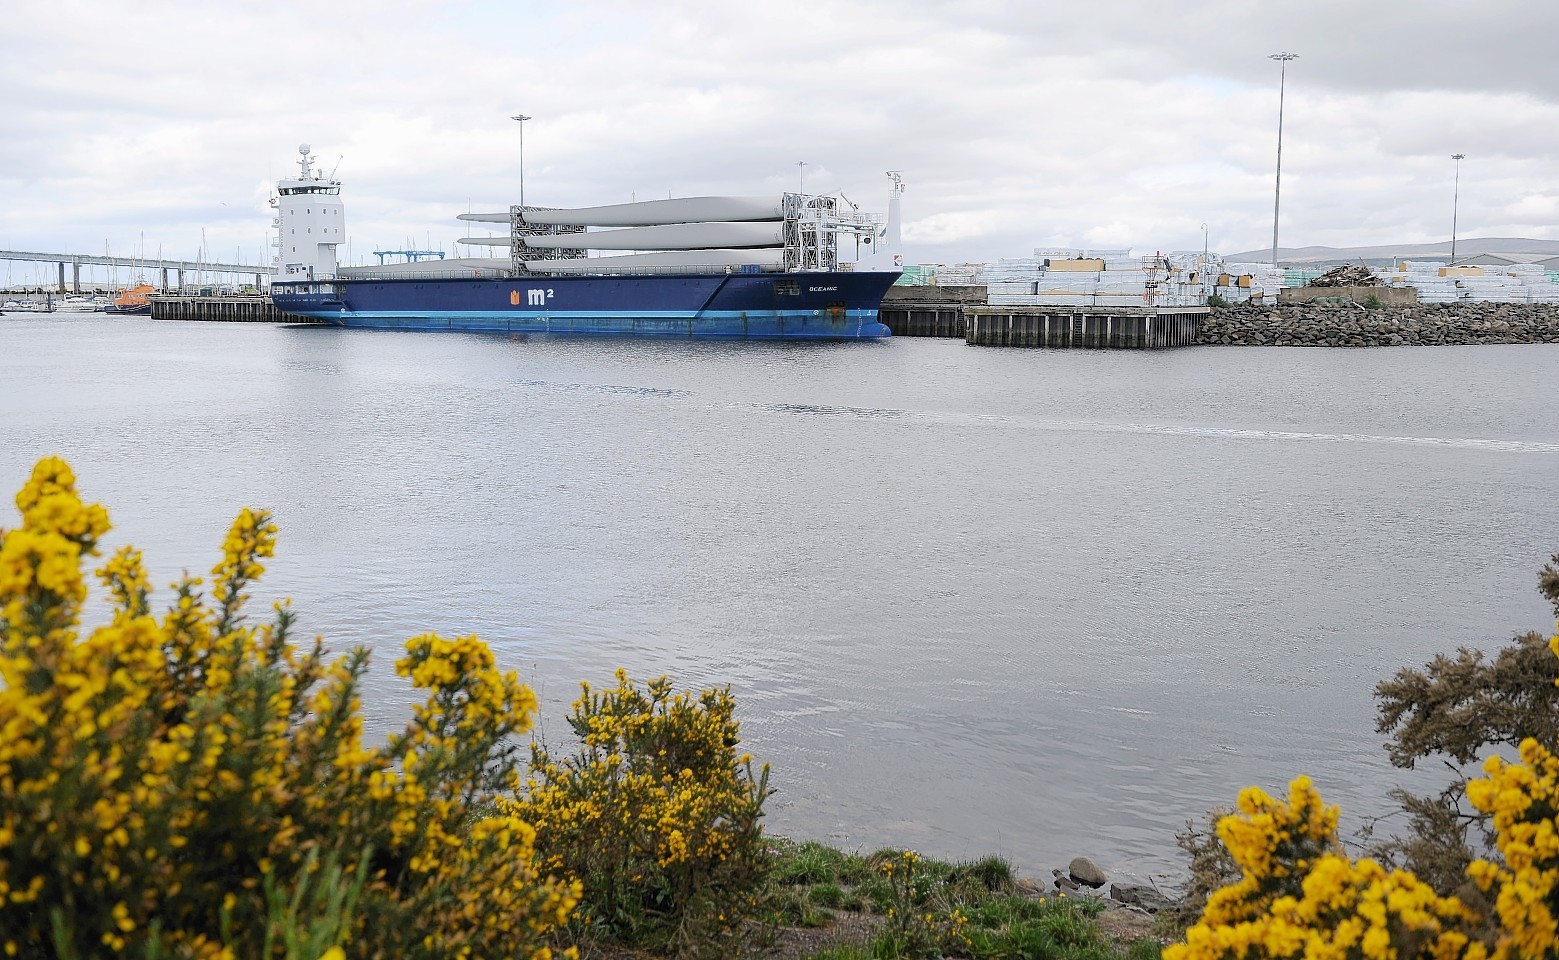 The ship. 'Oceanic' carrying wind turbine blades at Inverness Harbour.